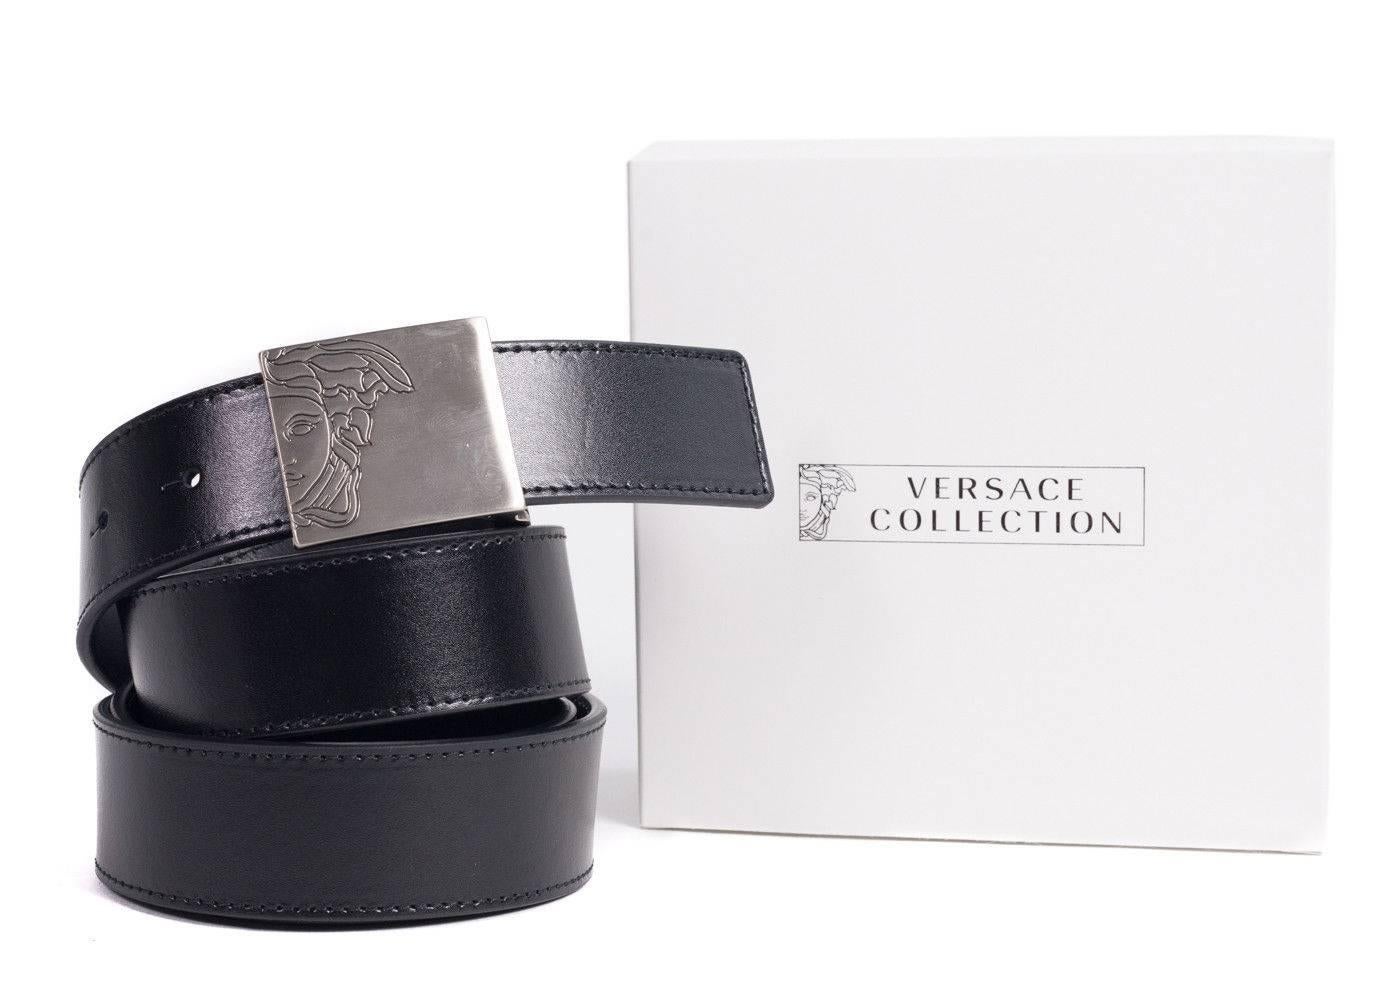 Brand New Versace Collection Belt
Original Tags
Retails in Stores & Online for $450
One Size Fits All


Versace Collection's black leather belt made with 100% calfskin leather featuring a silver plated logo with a half medusa head. Perfect to pair